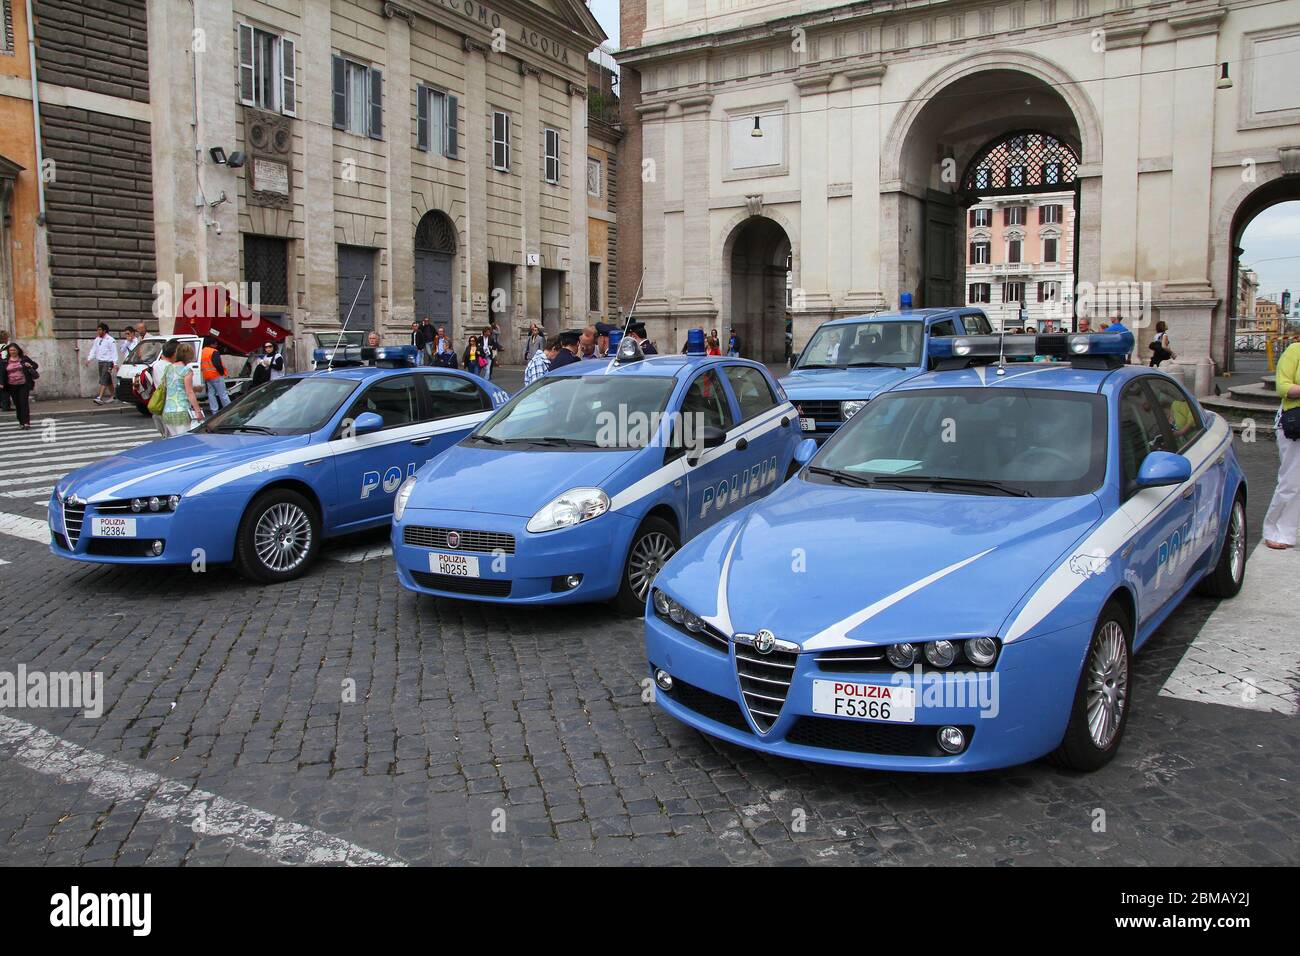 ROME - MAY 12: Italian Police vehicles on May 12, 2010 in Rome. Italian Police is known for using only Italian-made vehicles (Fiat Grande Punto and Al Stock Photo